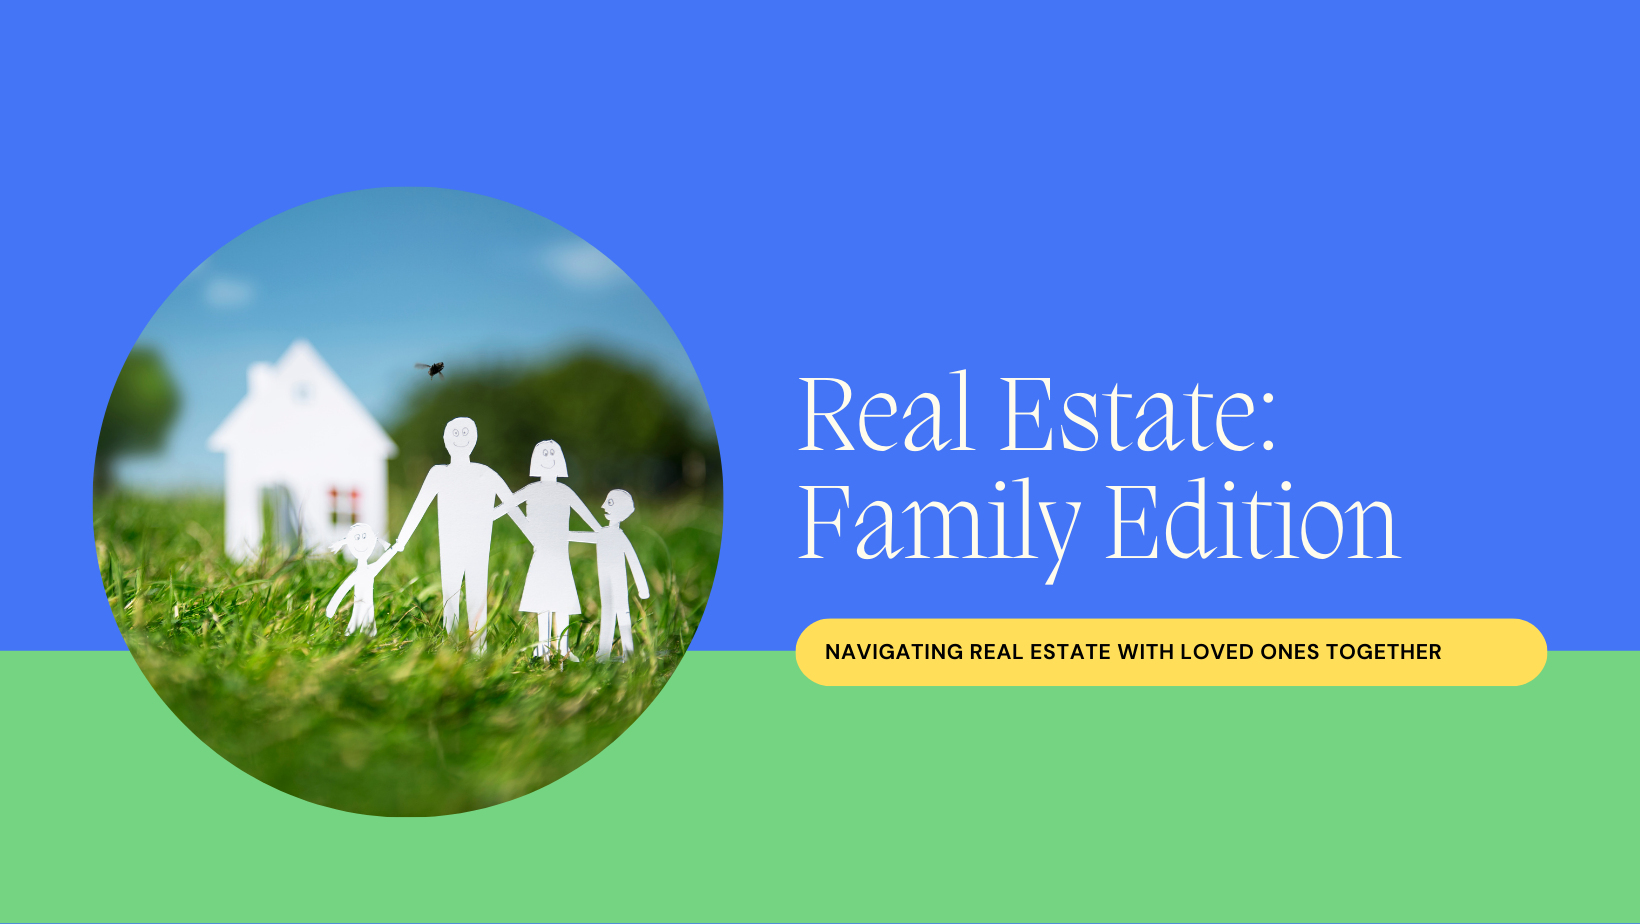 Real Estate with Family